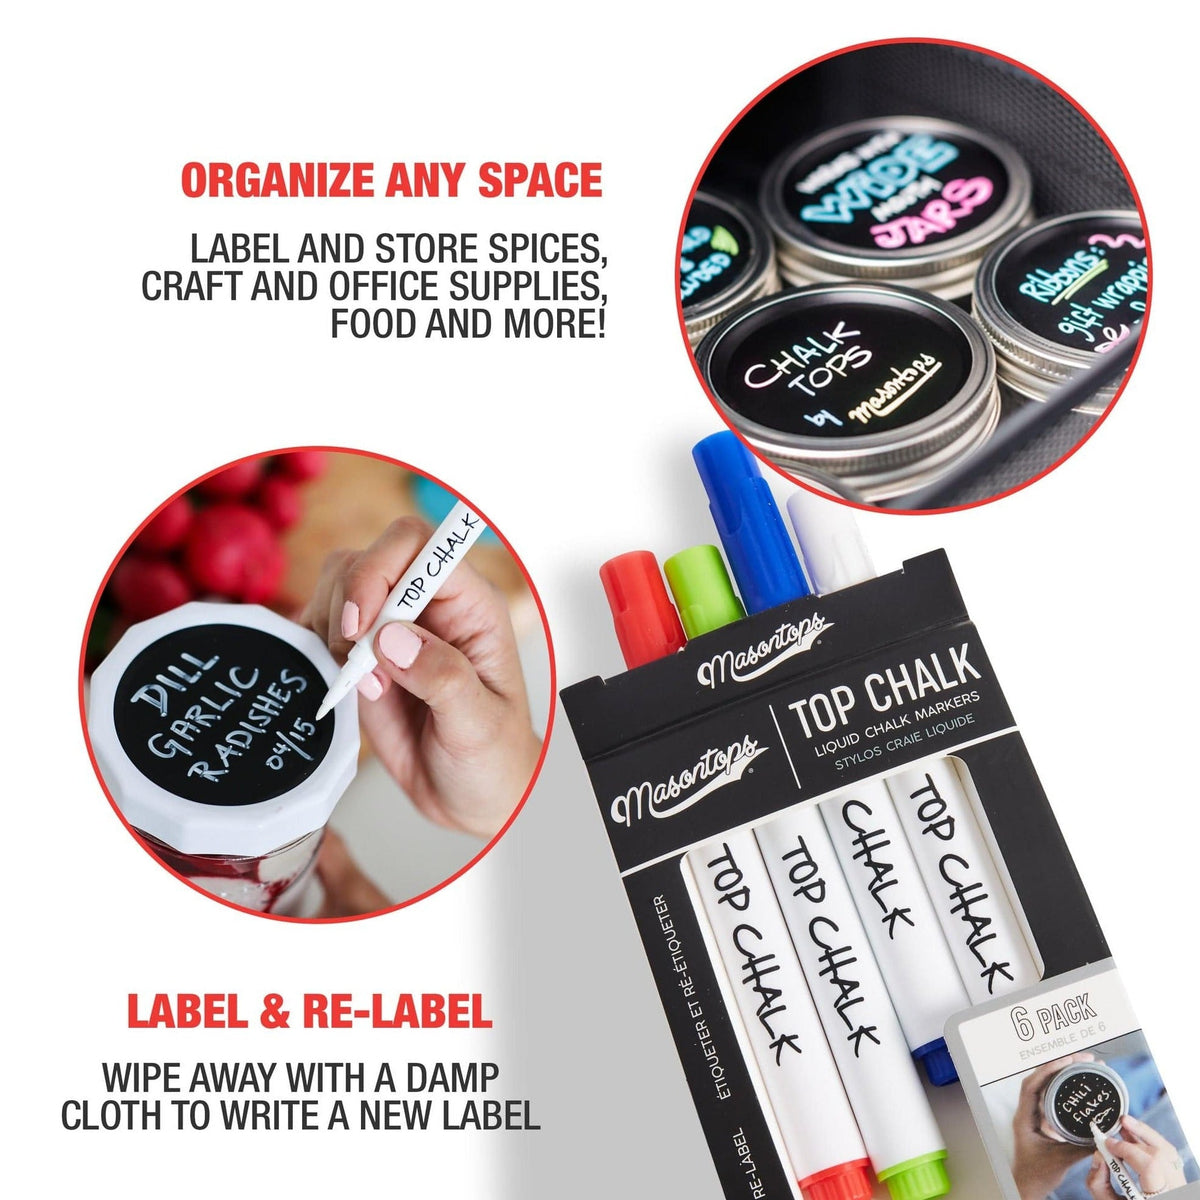 Masontops Liquid chalk marker with the words: &quot;Organize any space, Label and store spices, Craft and office supplies, food and more!&quot; &quot;Label and Re-Label, Wipe away with a damp cloth to write a new label&quot; There is writing on the jar lids.